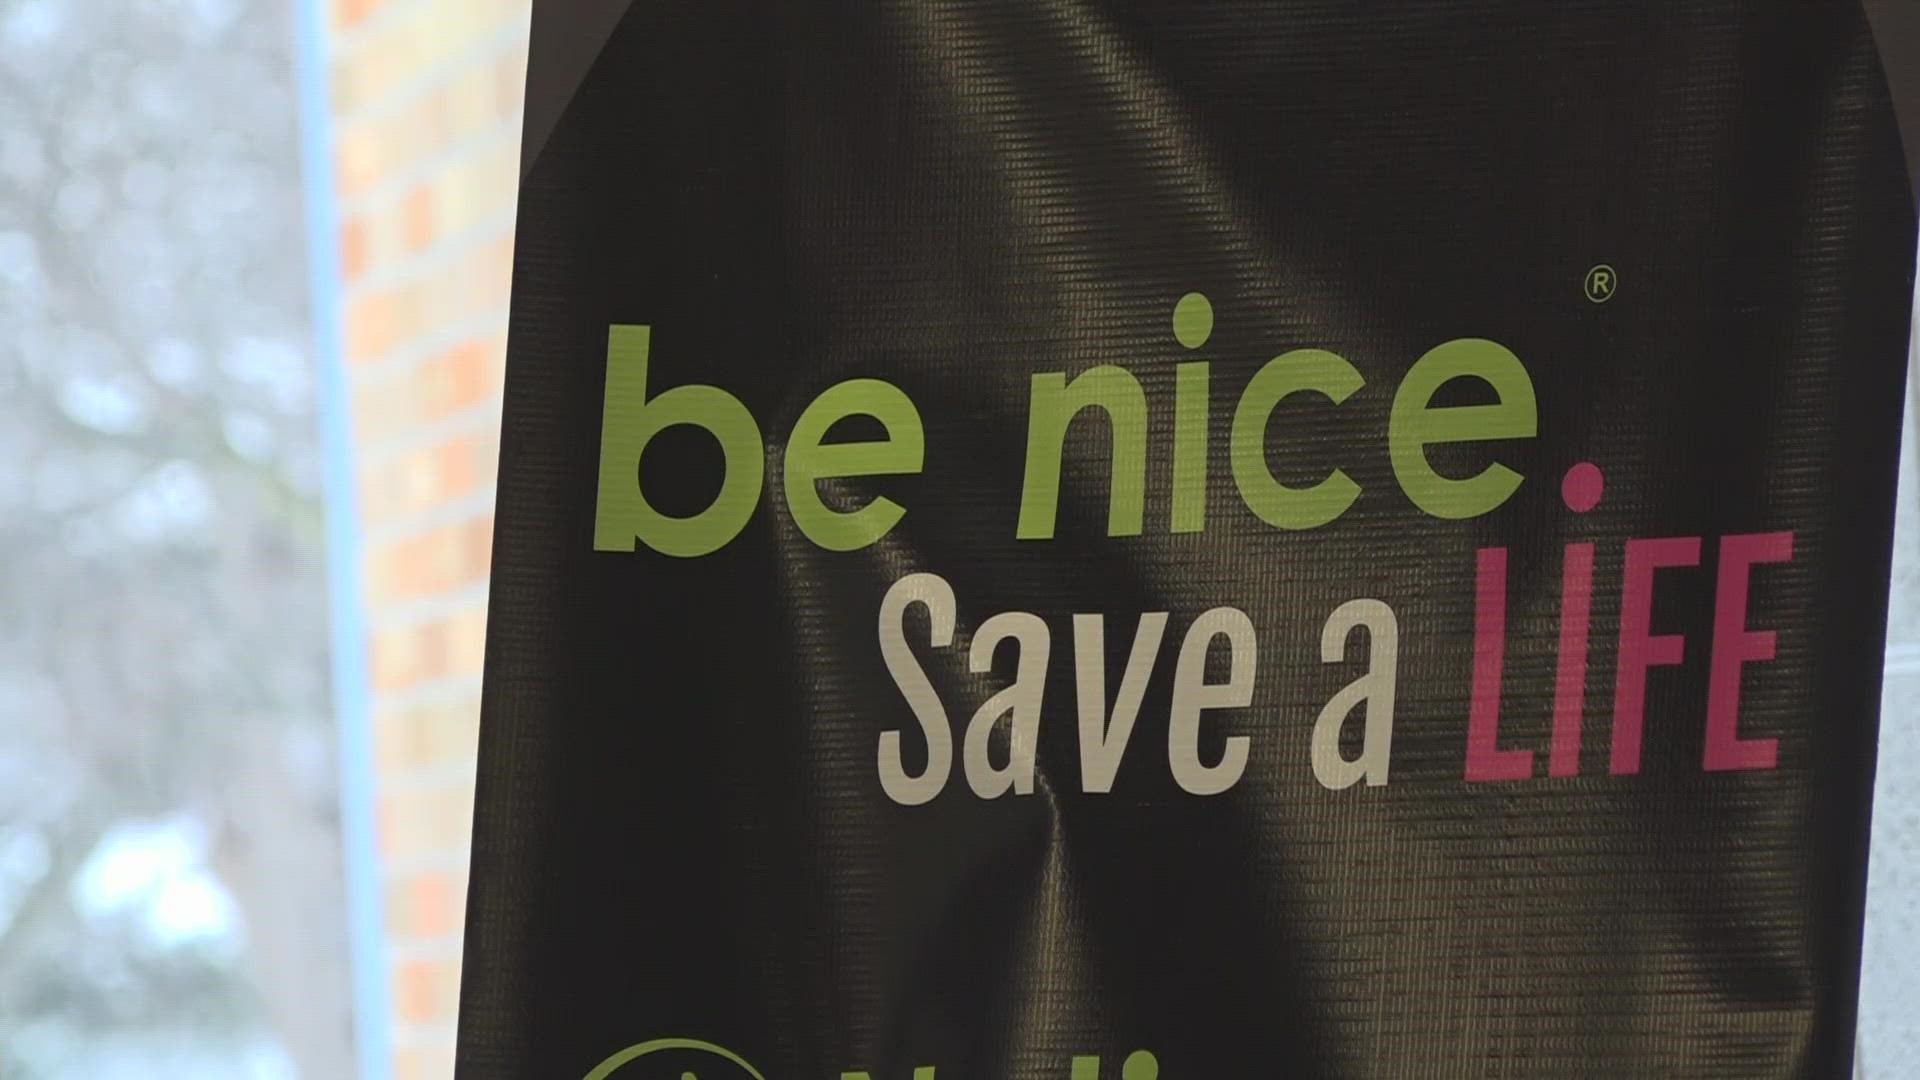 "Be nice" is a mental health suicide prevention education program in Grand Rapids with an action plan that has been proven to save lives.